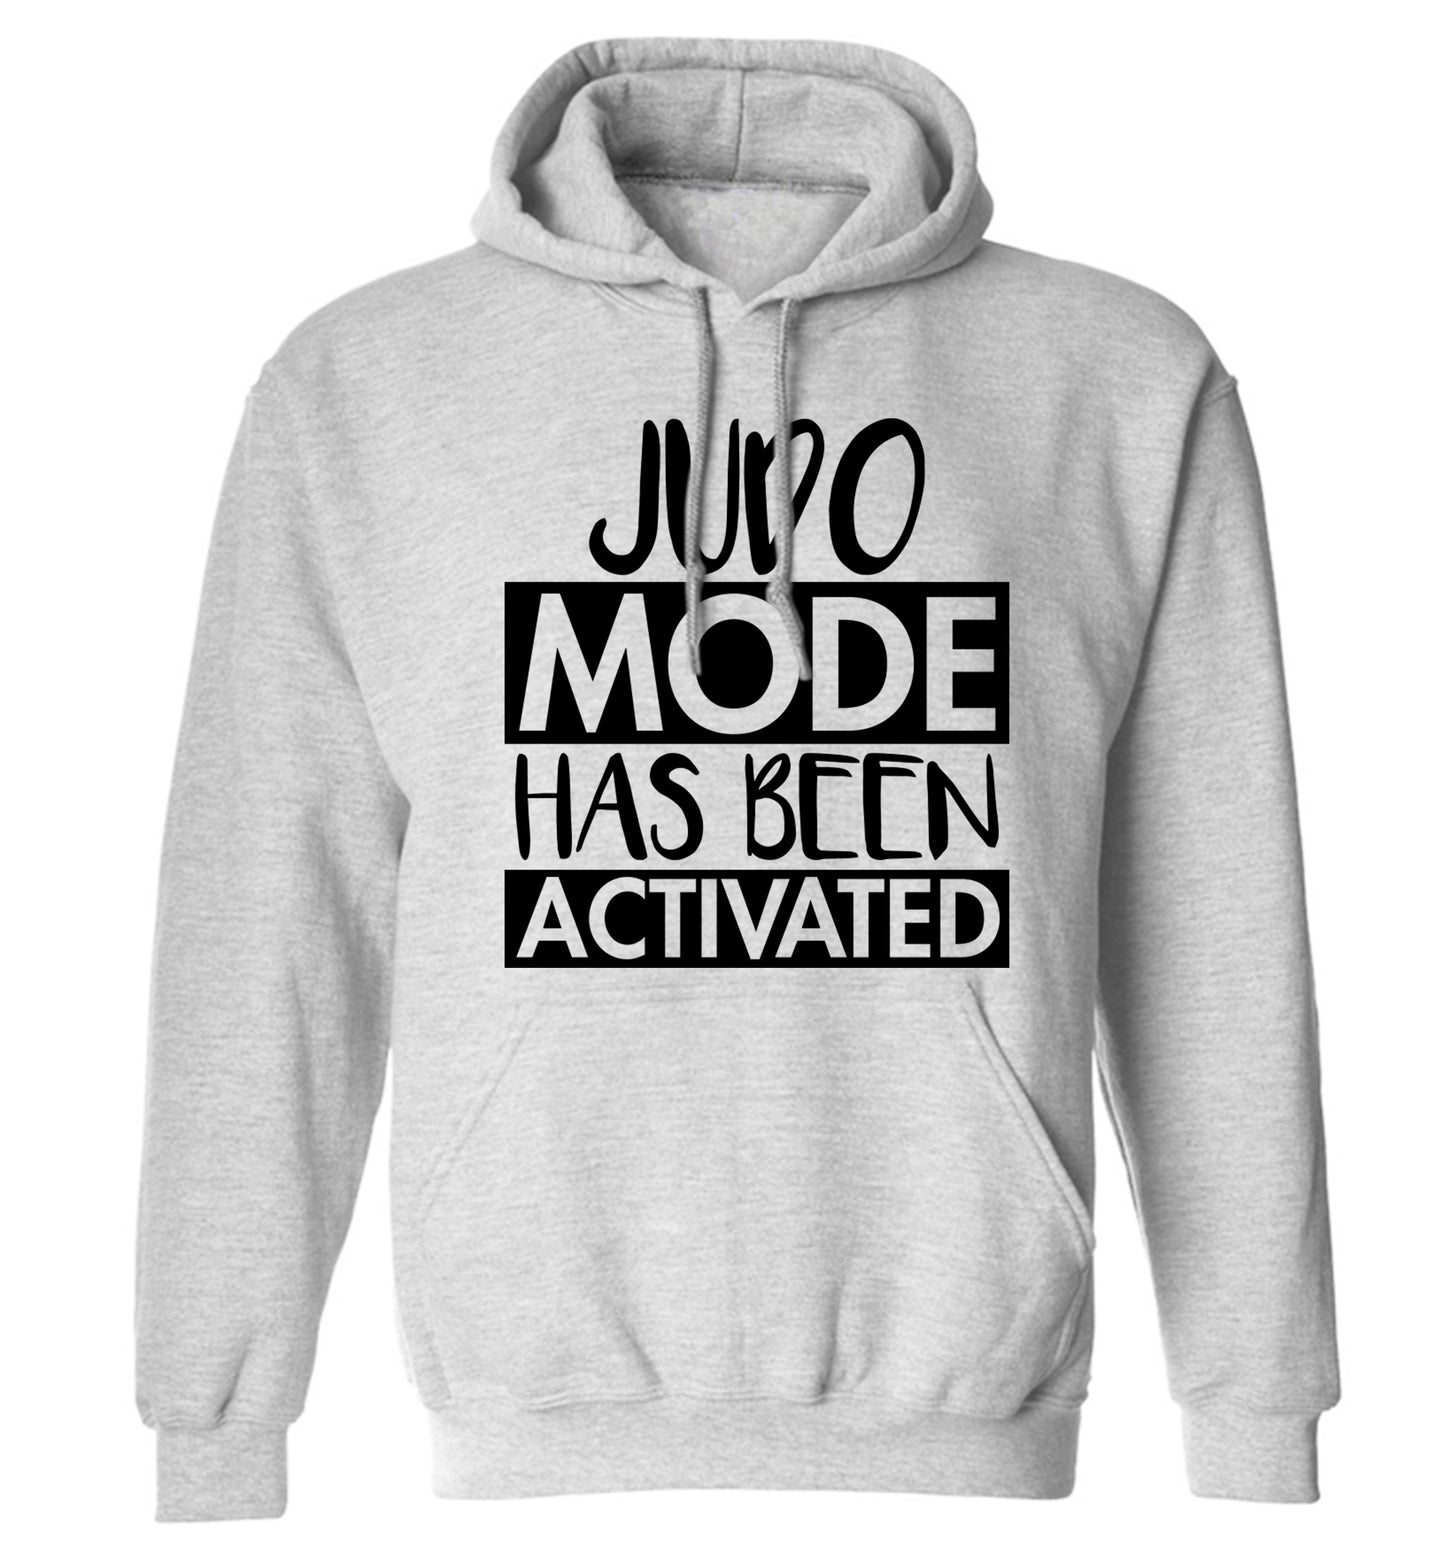 Judo mode activated adults unisex grey hoodie 2XL